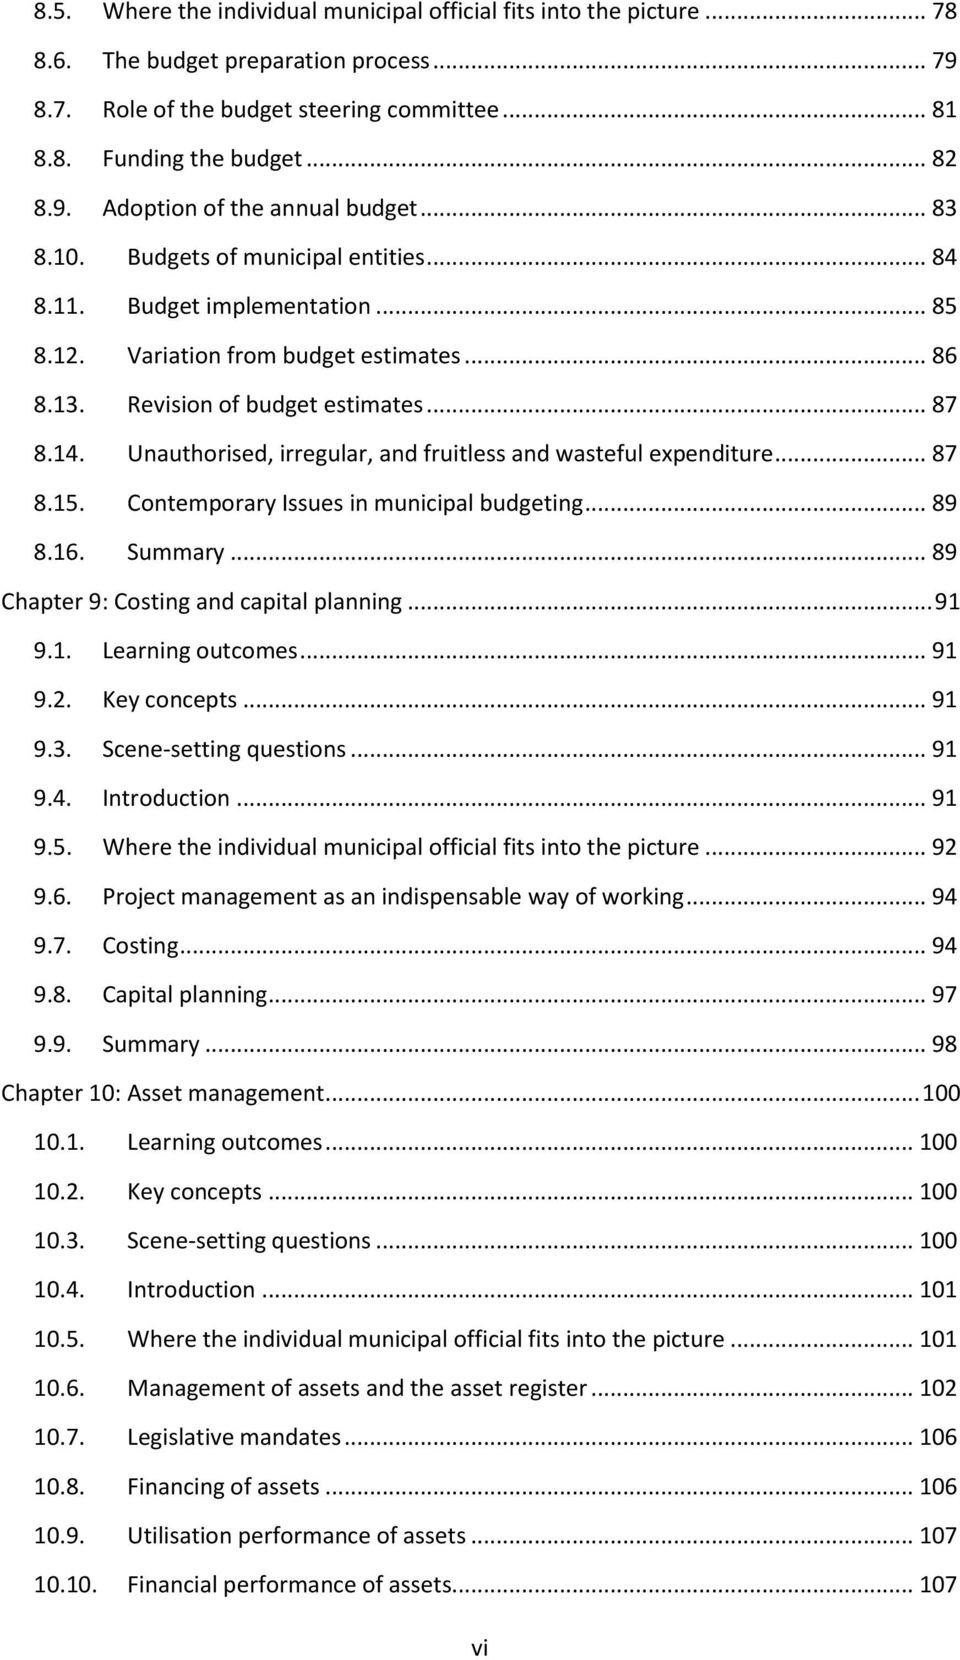 Unauthorised, irregular, and fruitless and wasteful expenditure... 87 8.15. Contemporary Issues in municipal budgeting... 89 8.16. Summary... 89 Chapter 9: Costing and capital planning... 91 9.1. Learning outcomes.